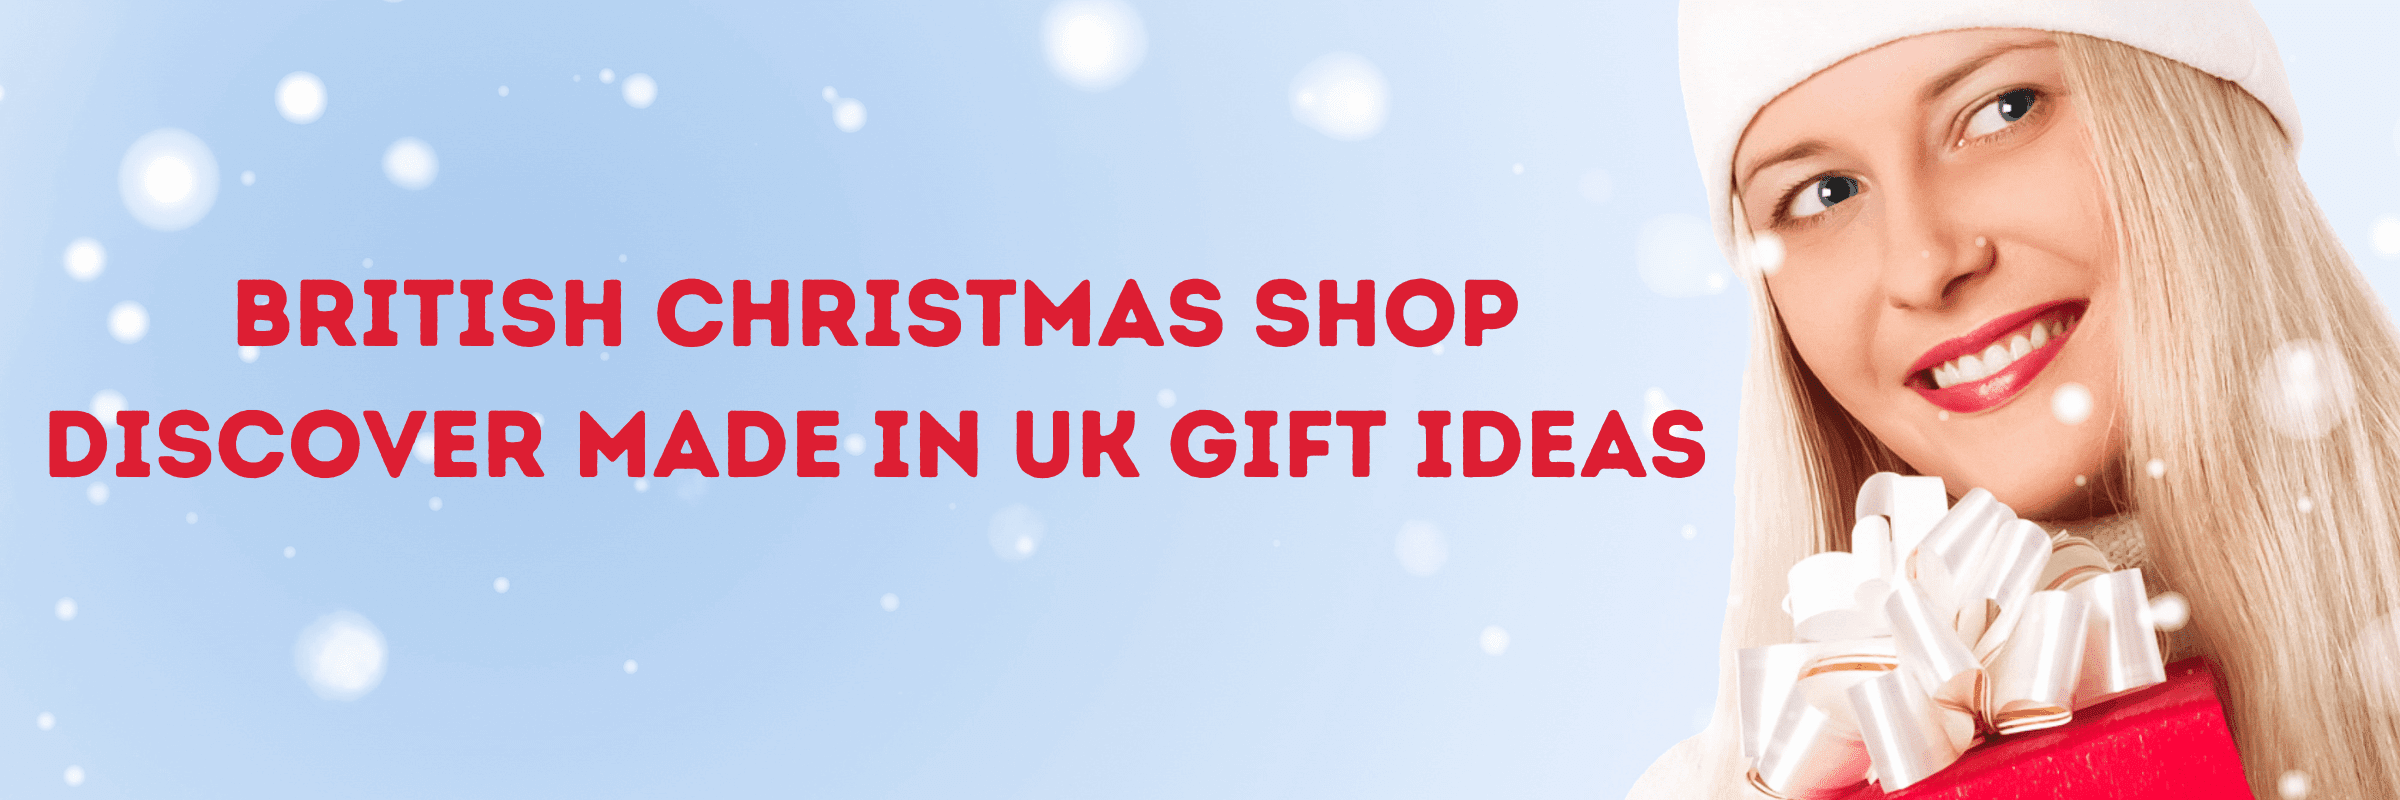 British Christmas Shop, Discover ideas for Made in UK presents for the whole family